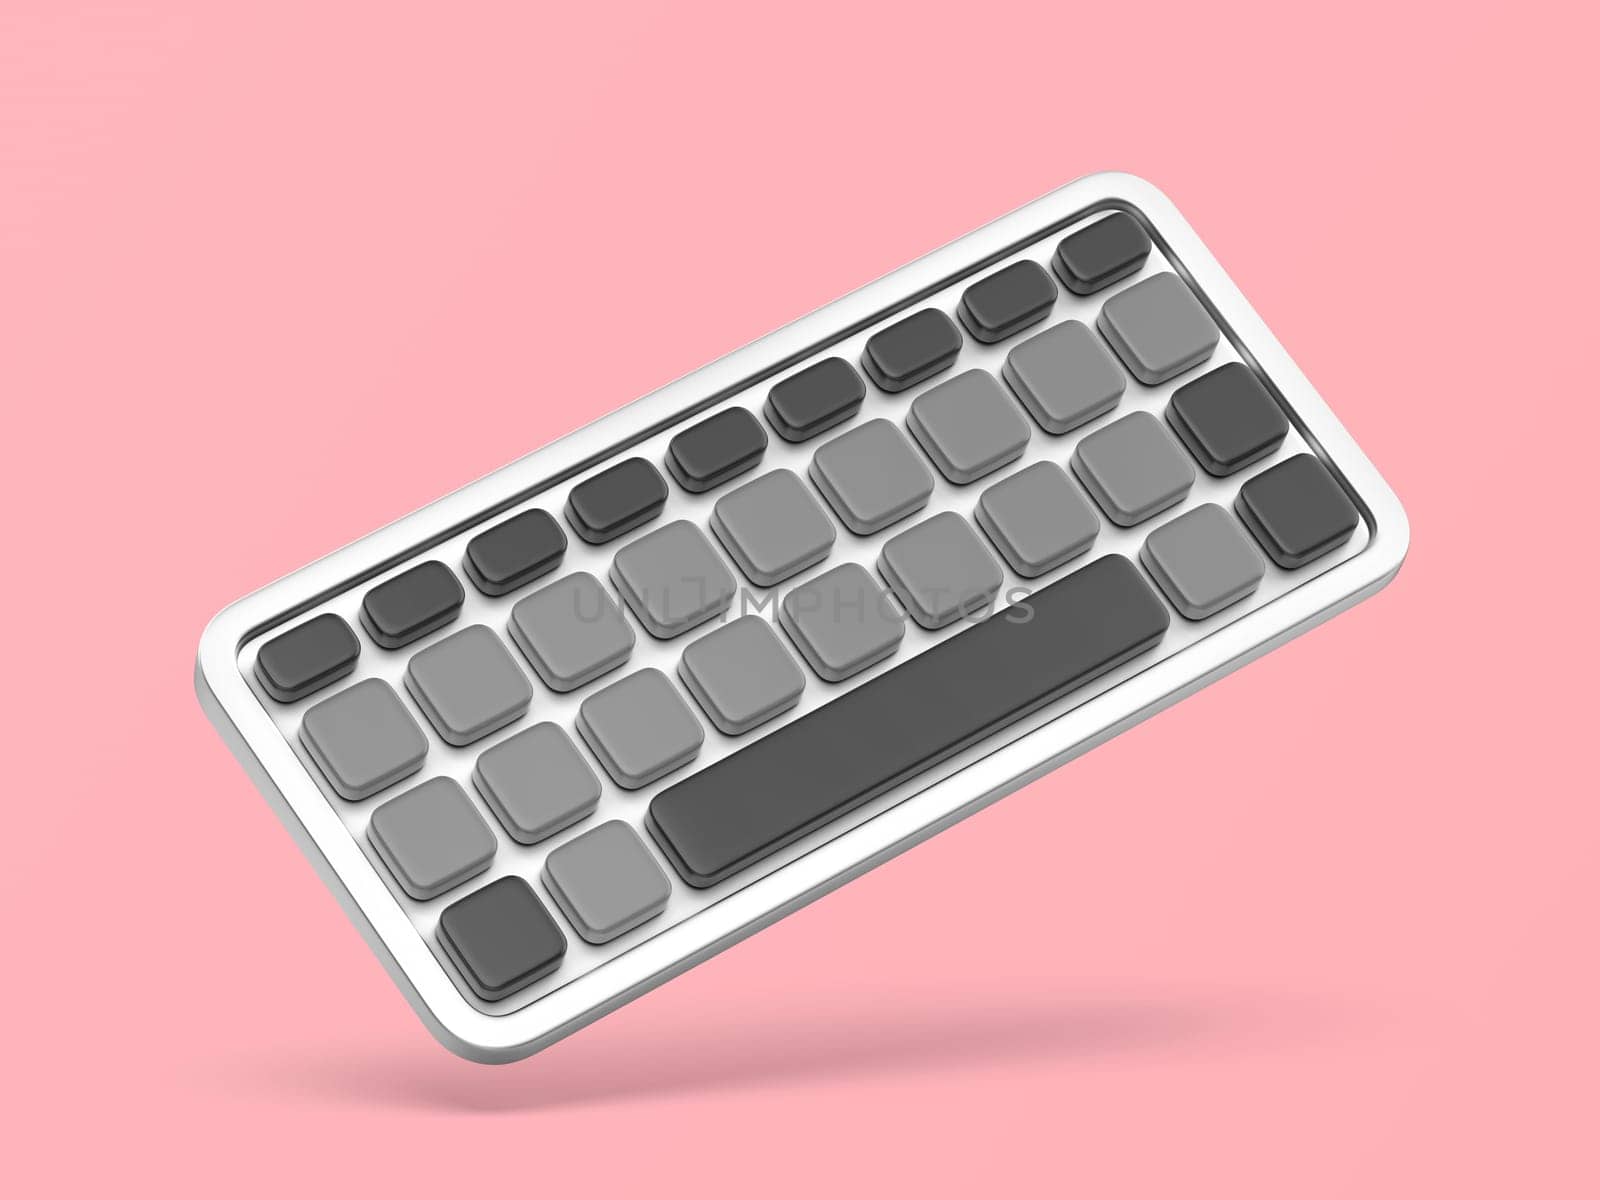 Simple wireless computer keyboard on pink background